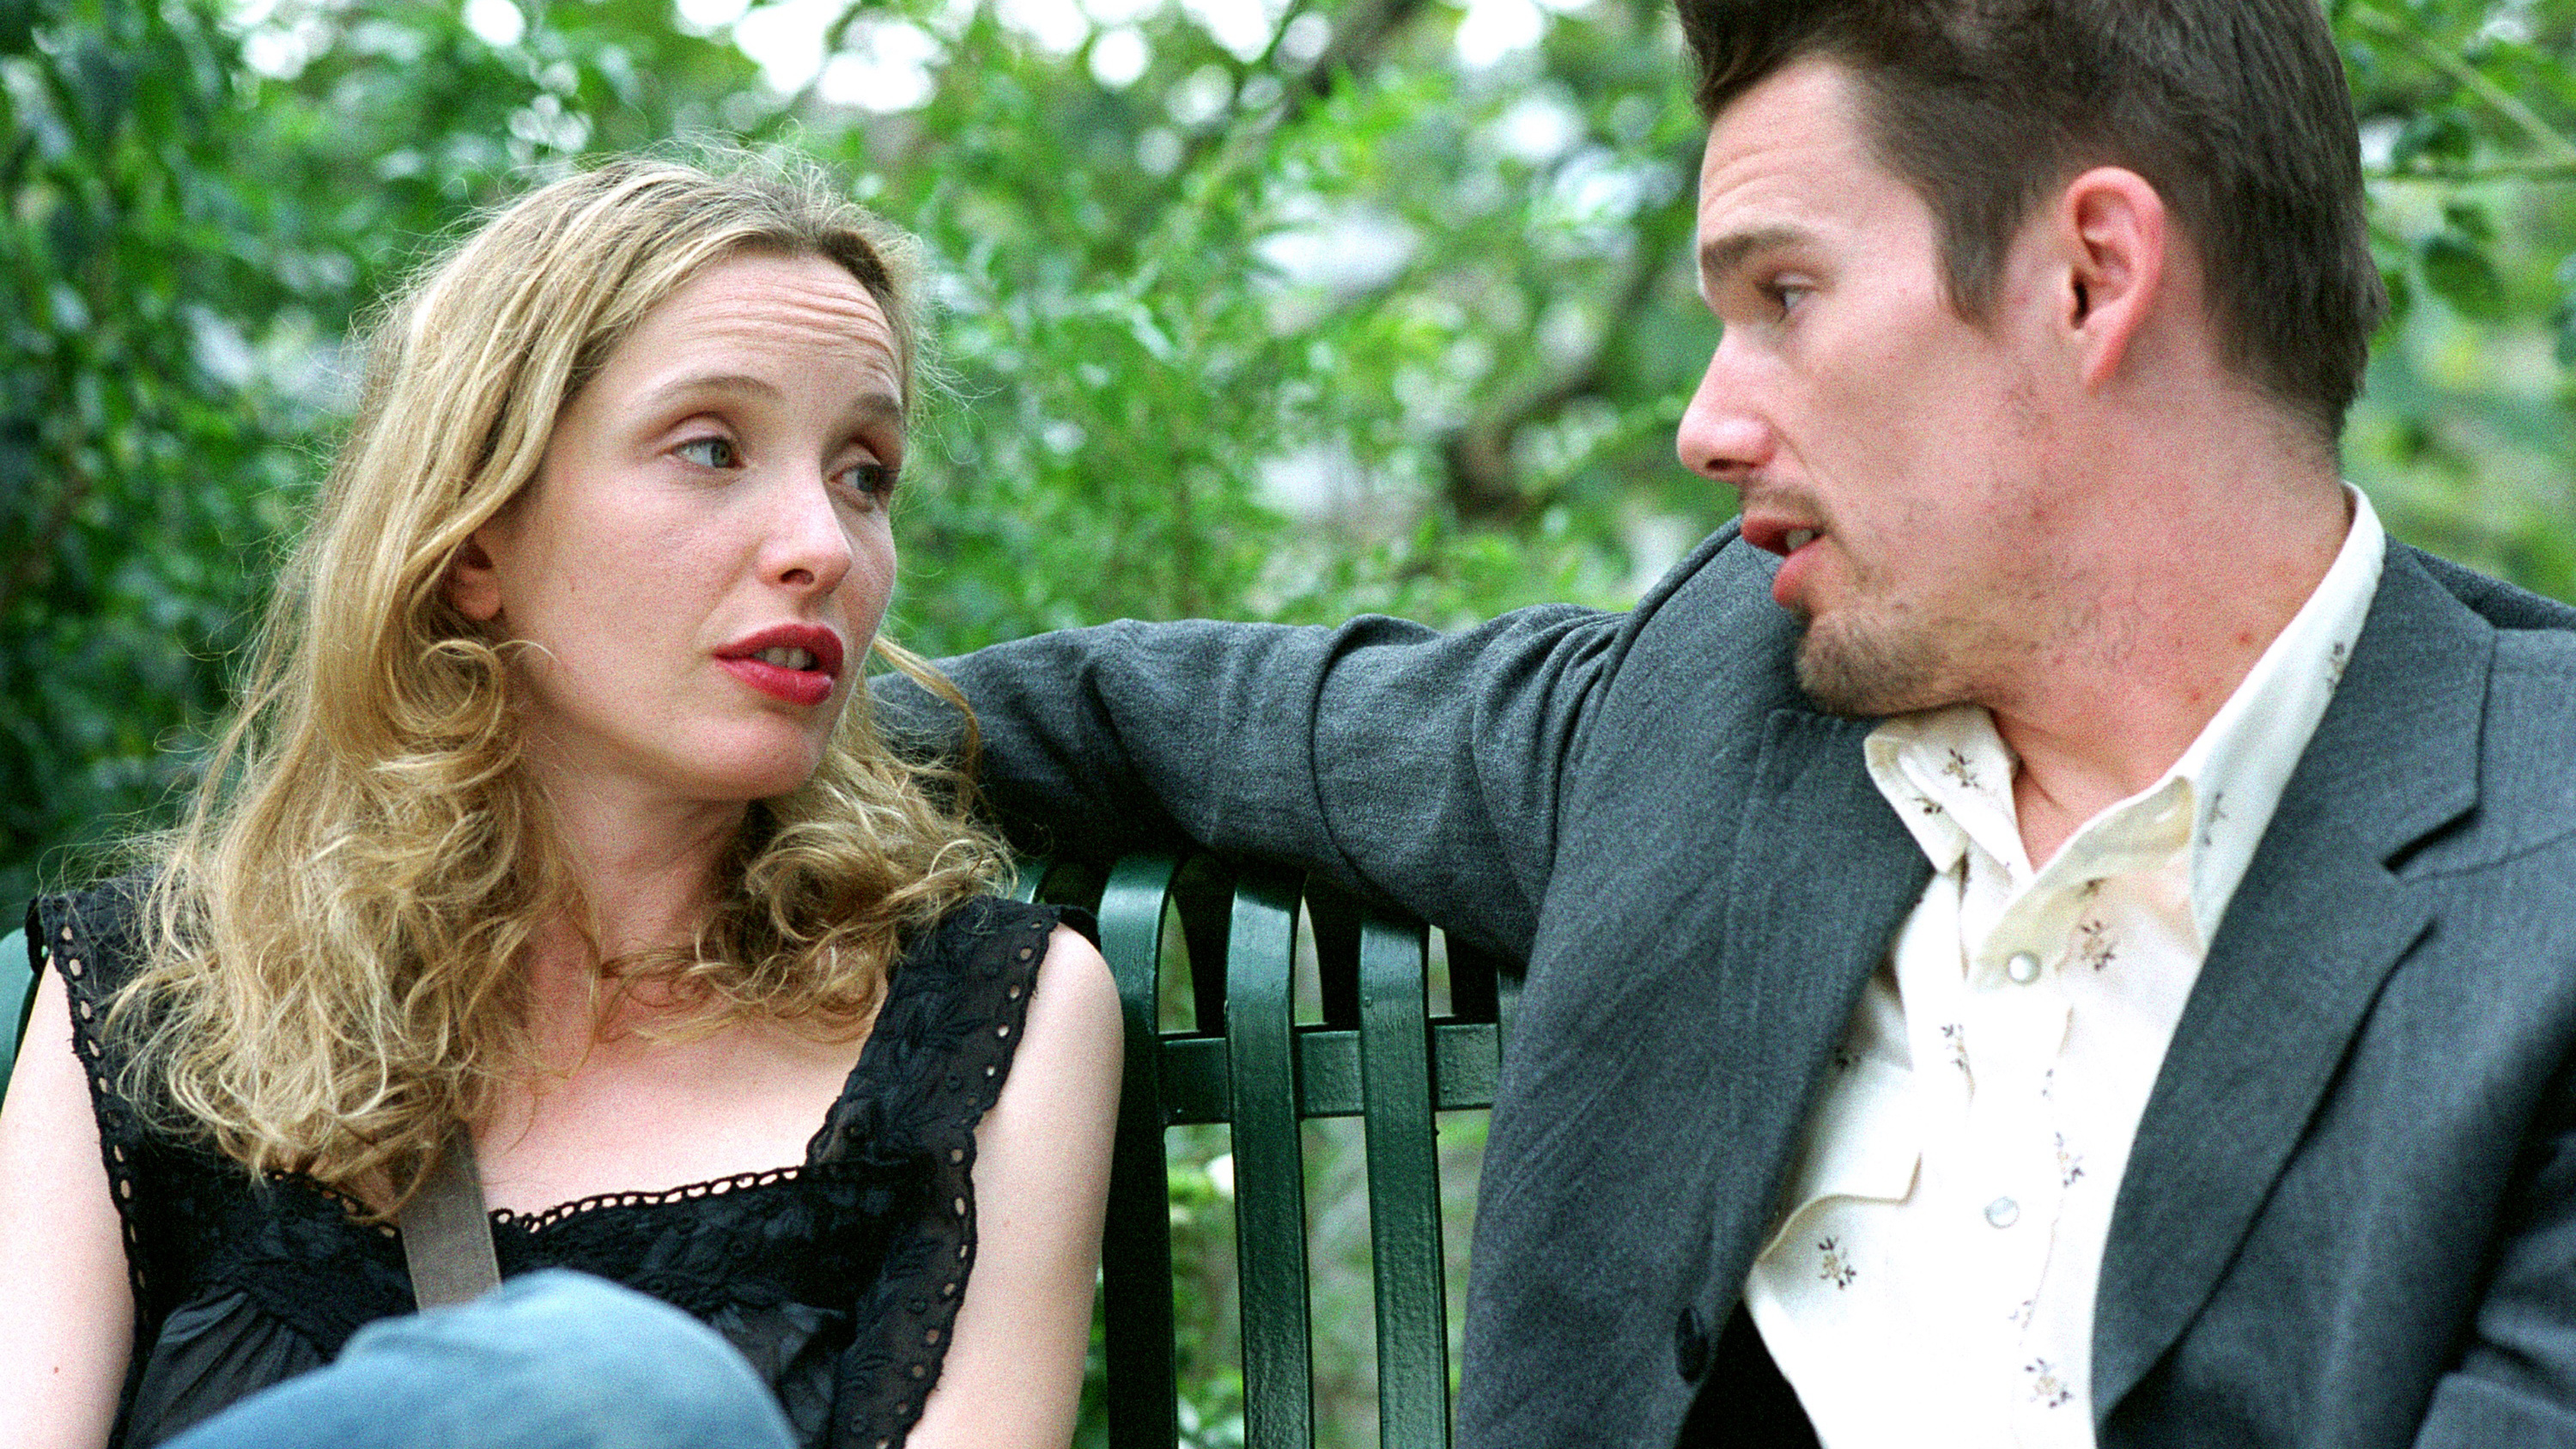 A scene from Before Sunset where a couple talks in a park